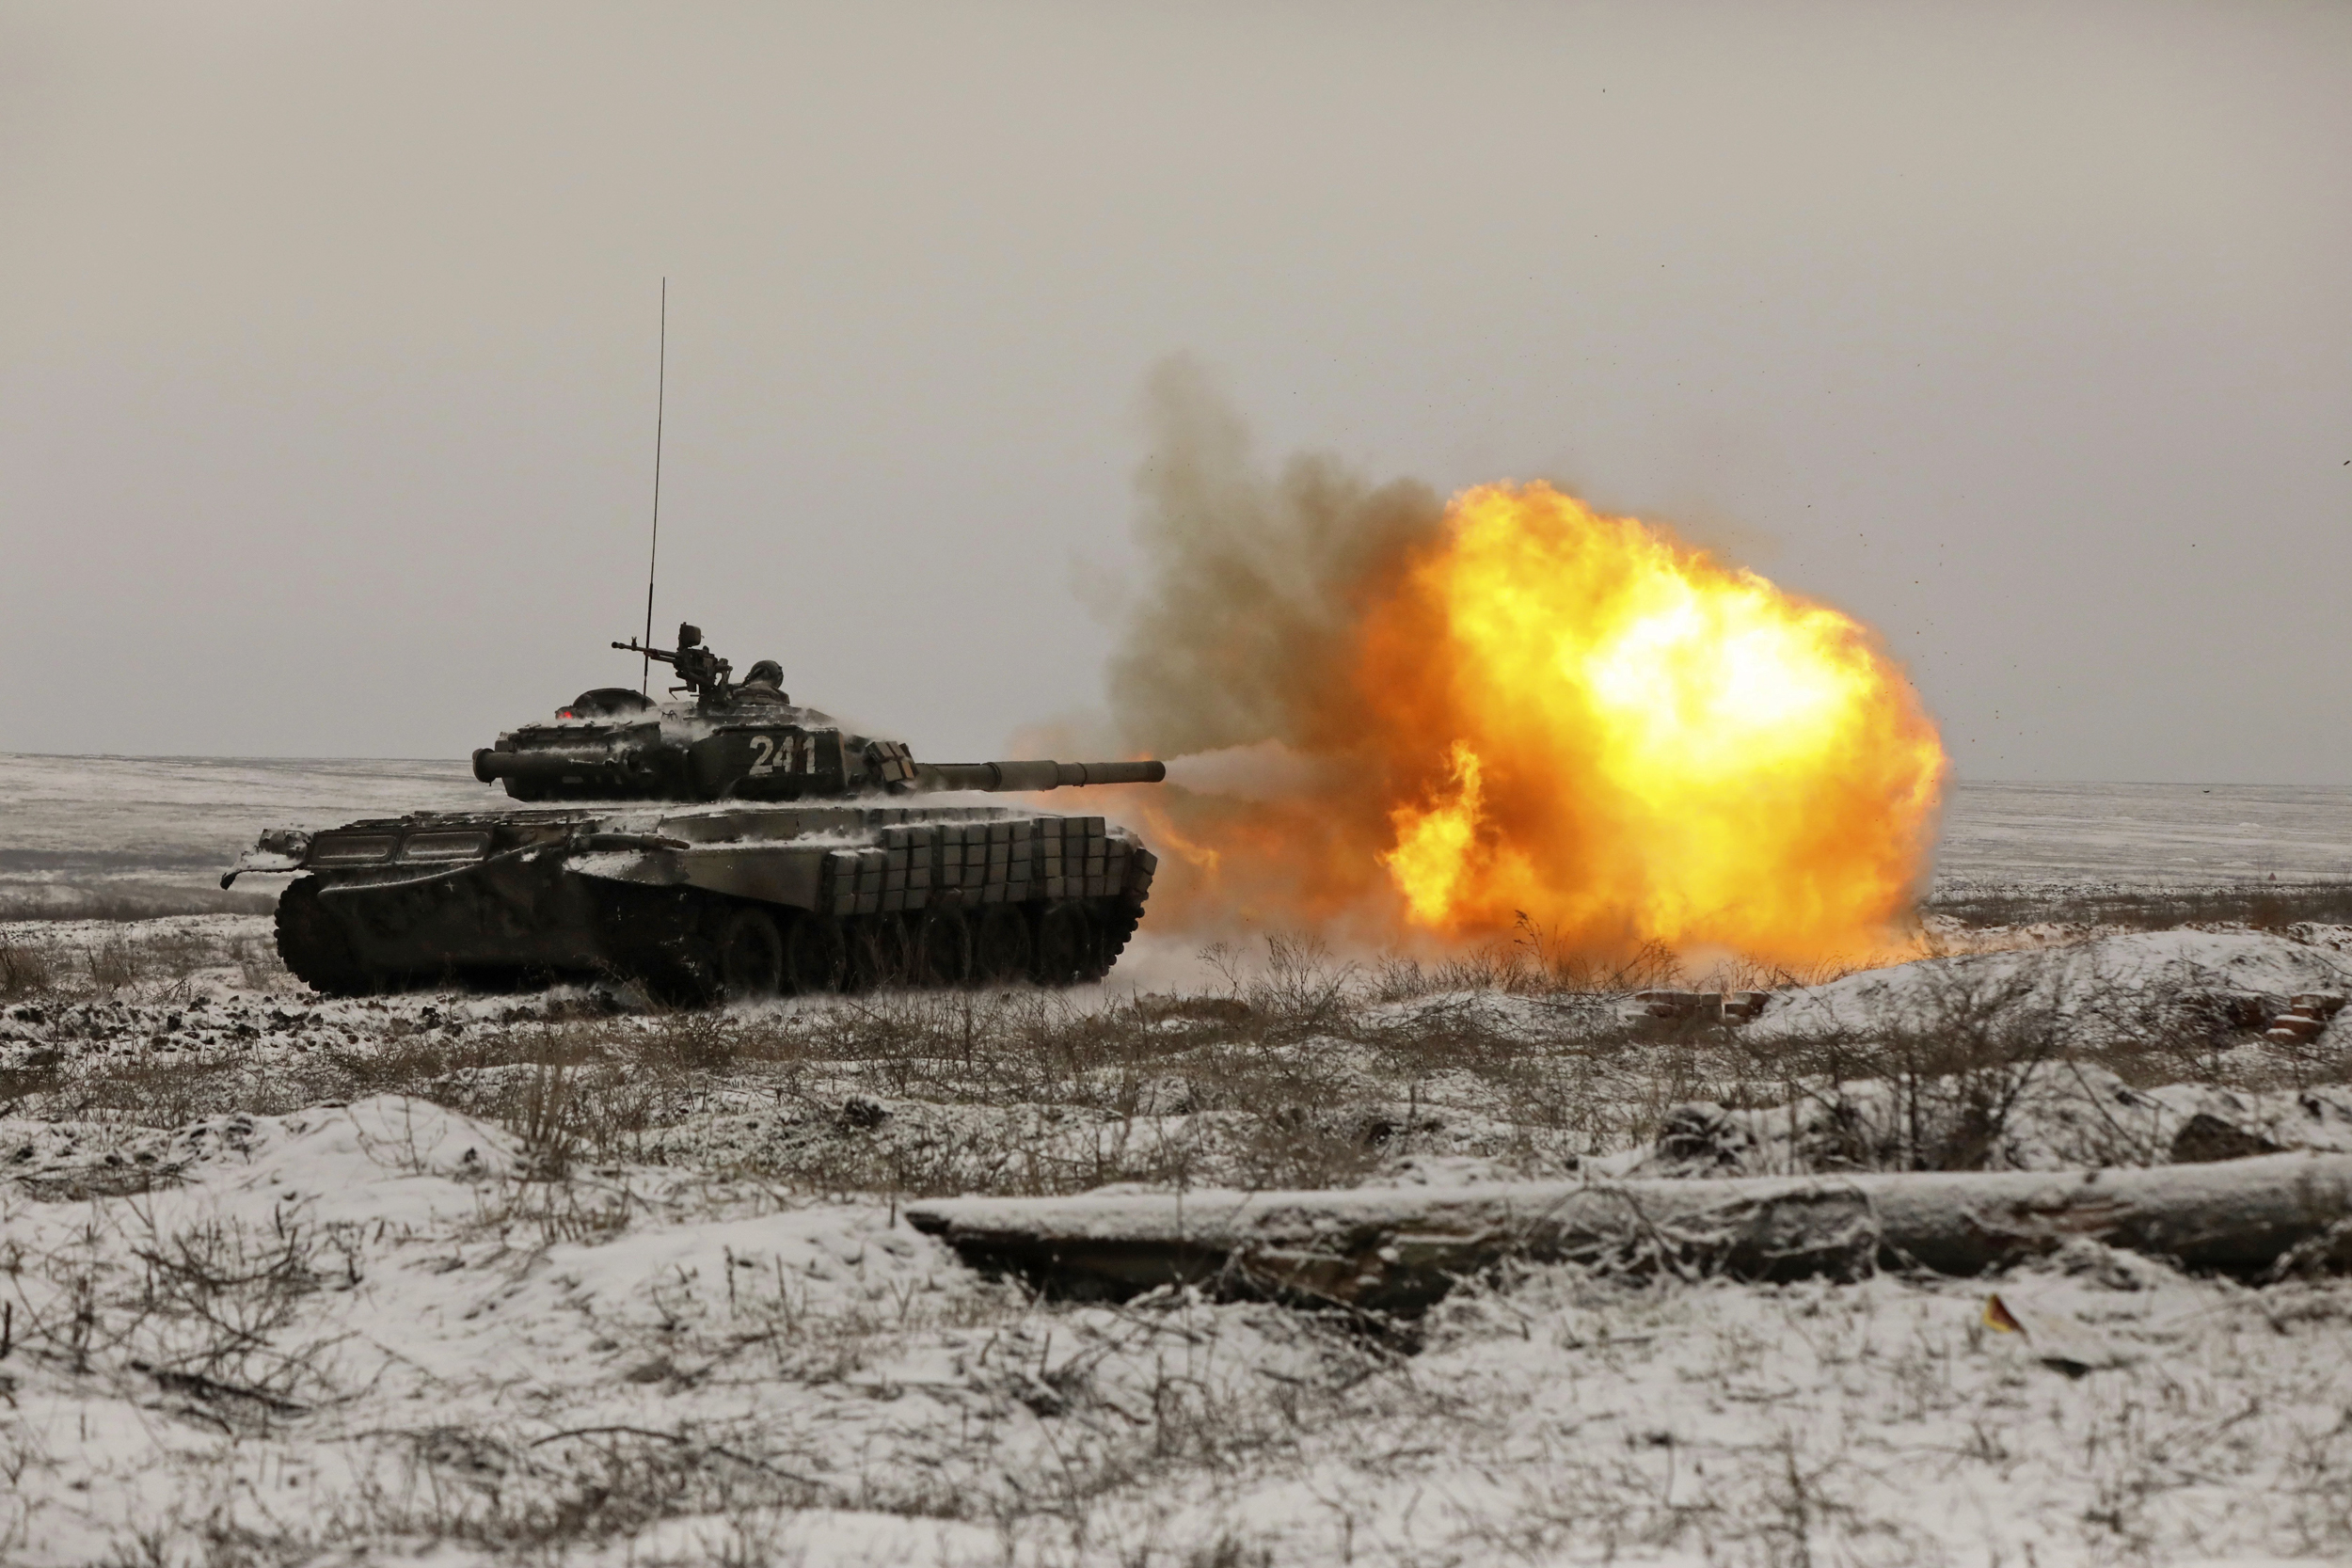 Washington’s warnings that Russia is about to invade frustrate Ukrainians